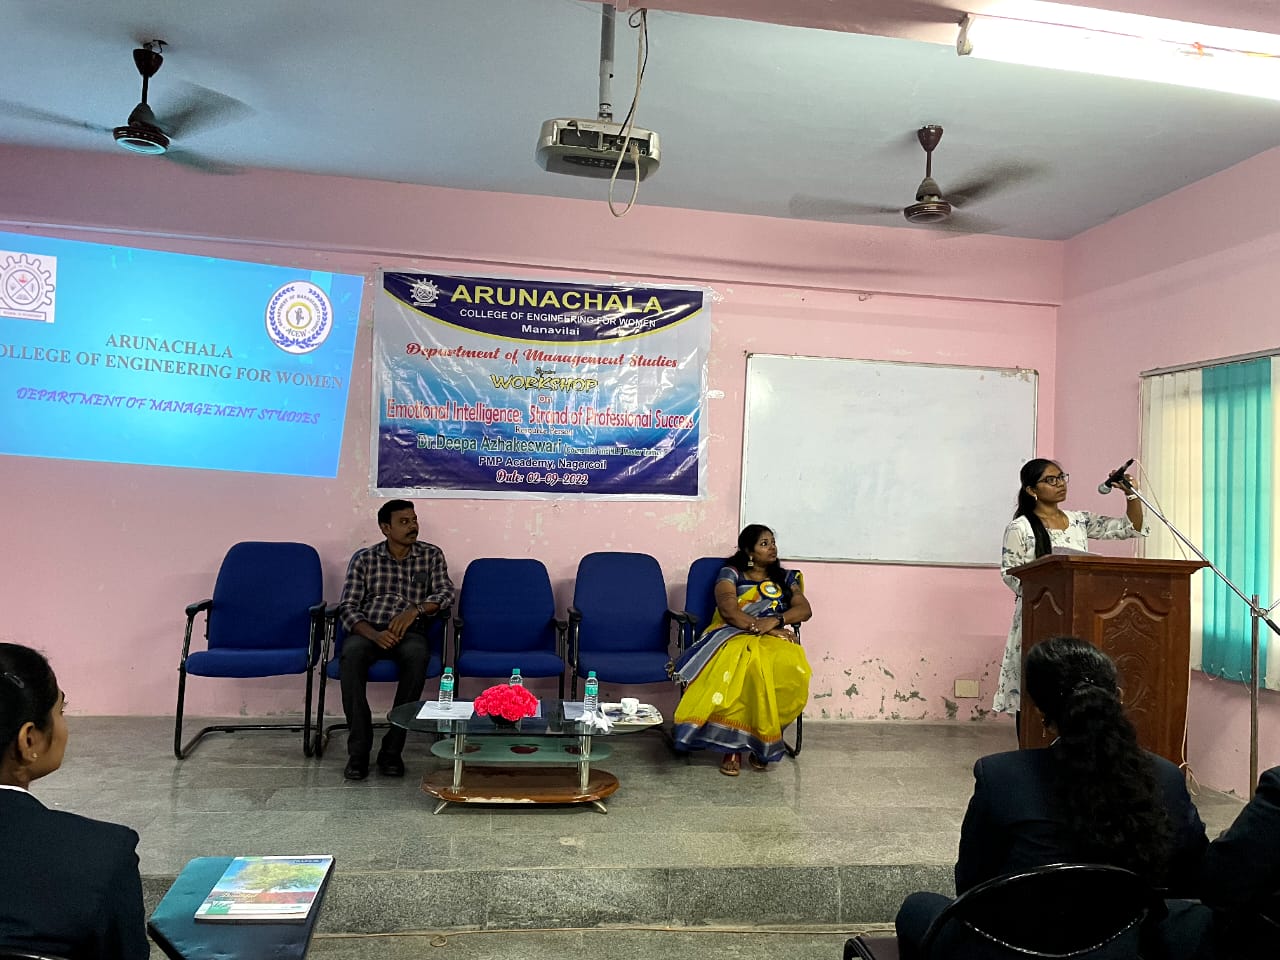 Workshop on Emotional Intelligence Strand of Professional Success  by Dr. Deepa Azhakeswari, Counselor and NLP Master Trainer PMP Academy, Nagercoil f